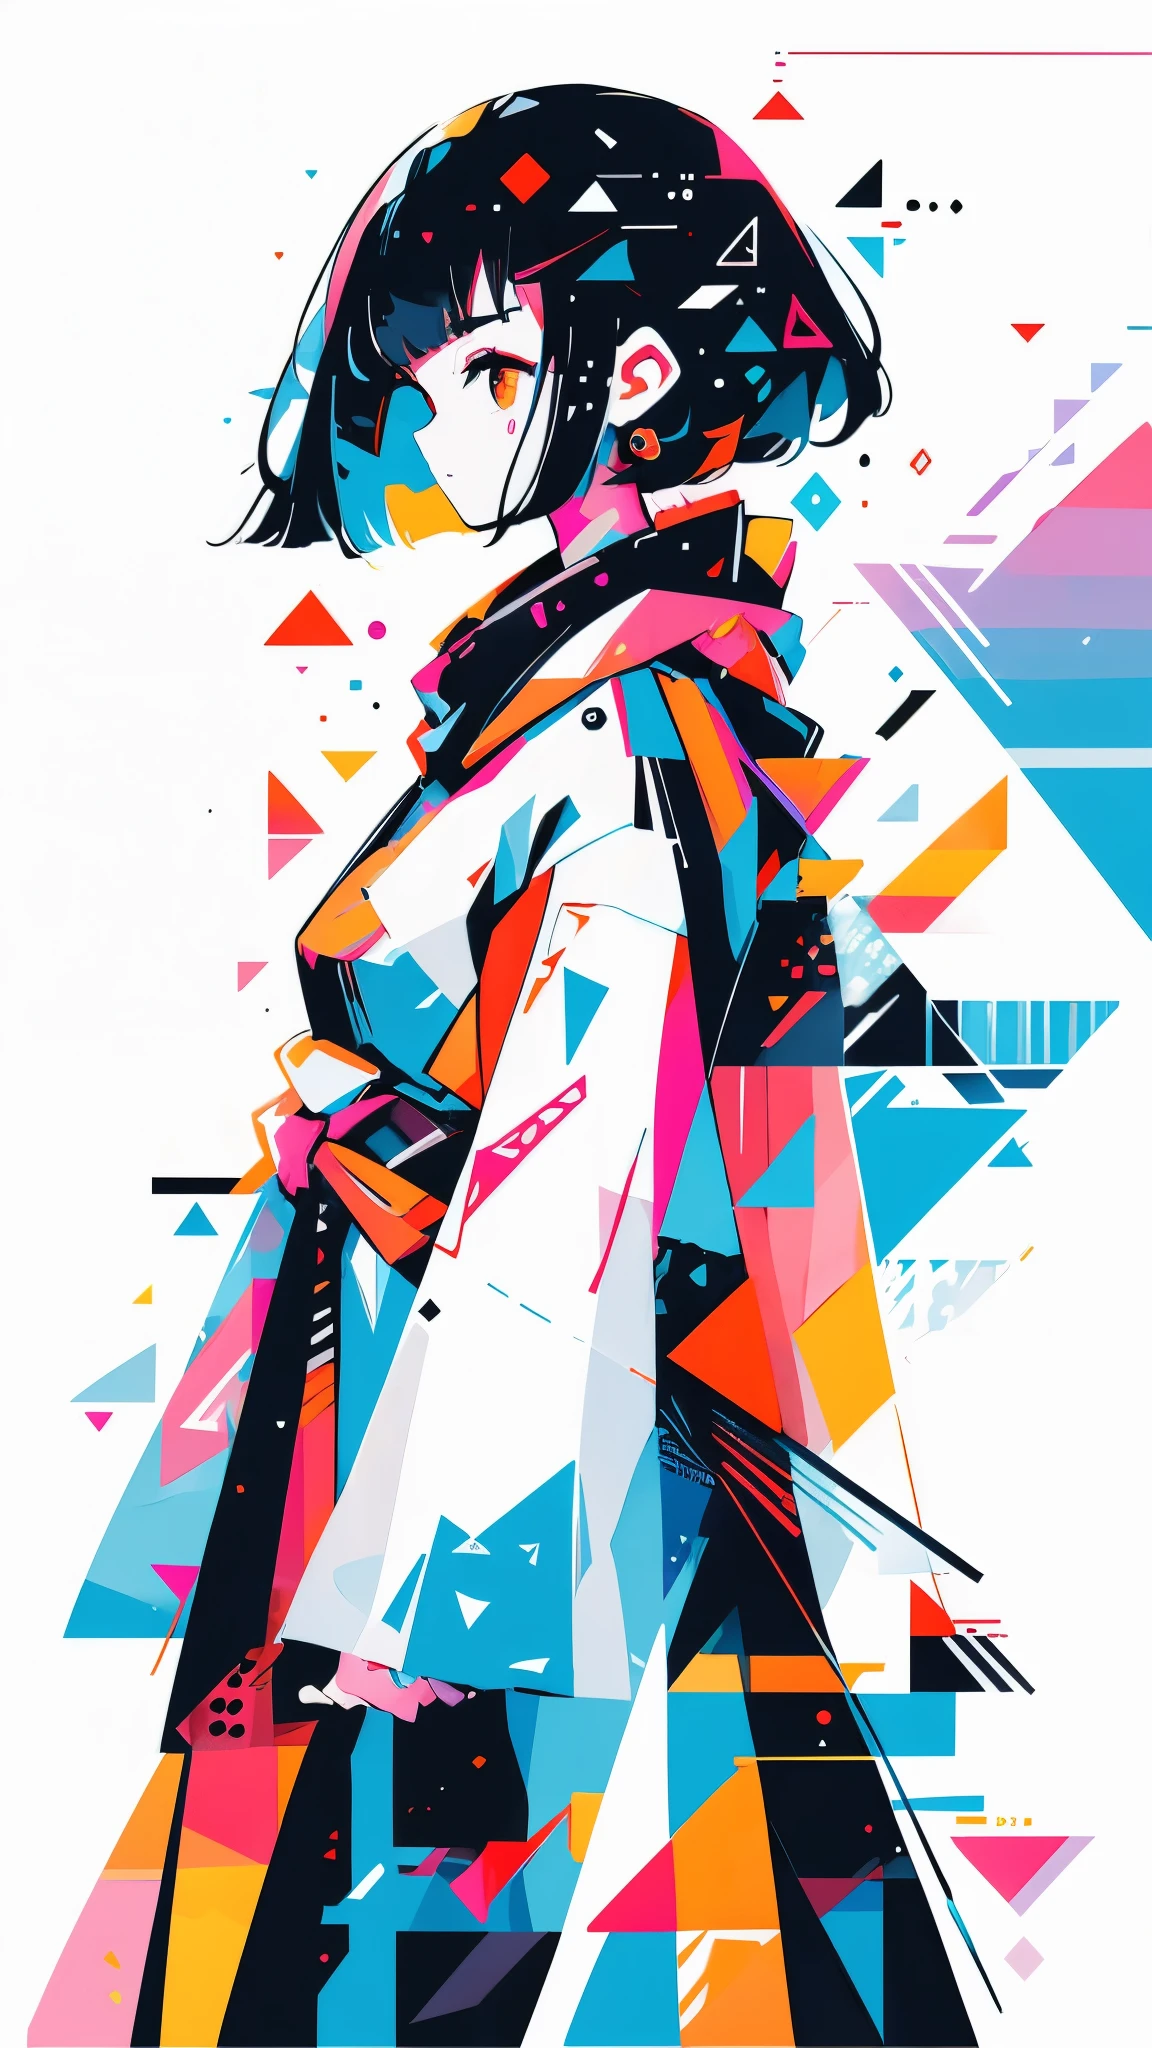 (masterpiece, top quality, best quality, official art, beautiful and aesthetic:1.2), 1girl immersed in a world of glitch art, (digital distortion:1.1), pixels fragmented and scattered, data corruption creating unique patterns, colorful noise adding an element of visual chaos, contemporary aesthetics engulfing her entire being. The girl's expression reflects a sense of fascination and wonder, as she explores this abstract universe that surrounds her. The background is a blend of vibrant colors, each hue melding seamlessly into the next, creating a mesmerizing effect. The lines and shapes within the image appear sharp and defined despite the digital distortion, show